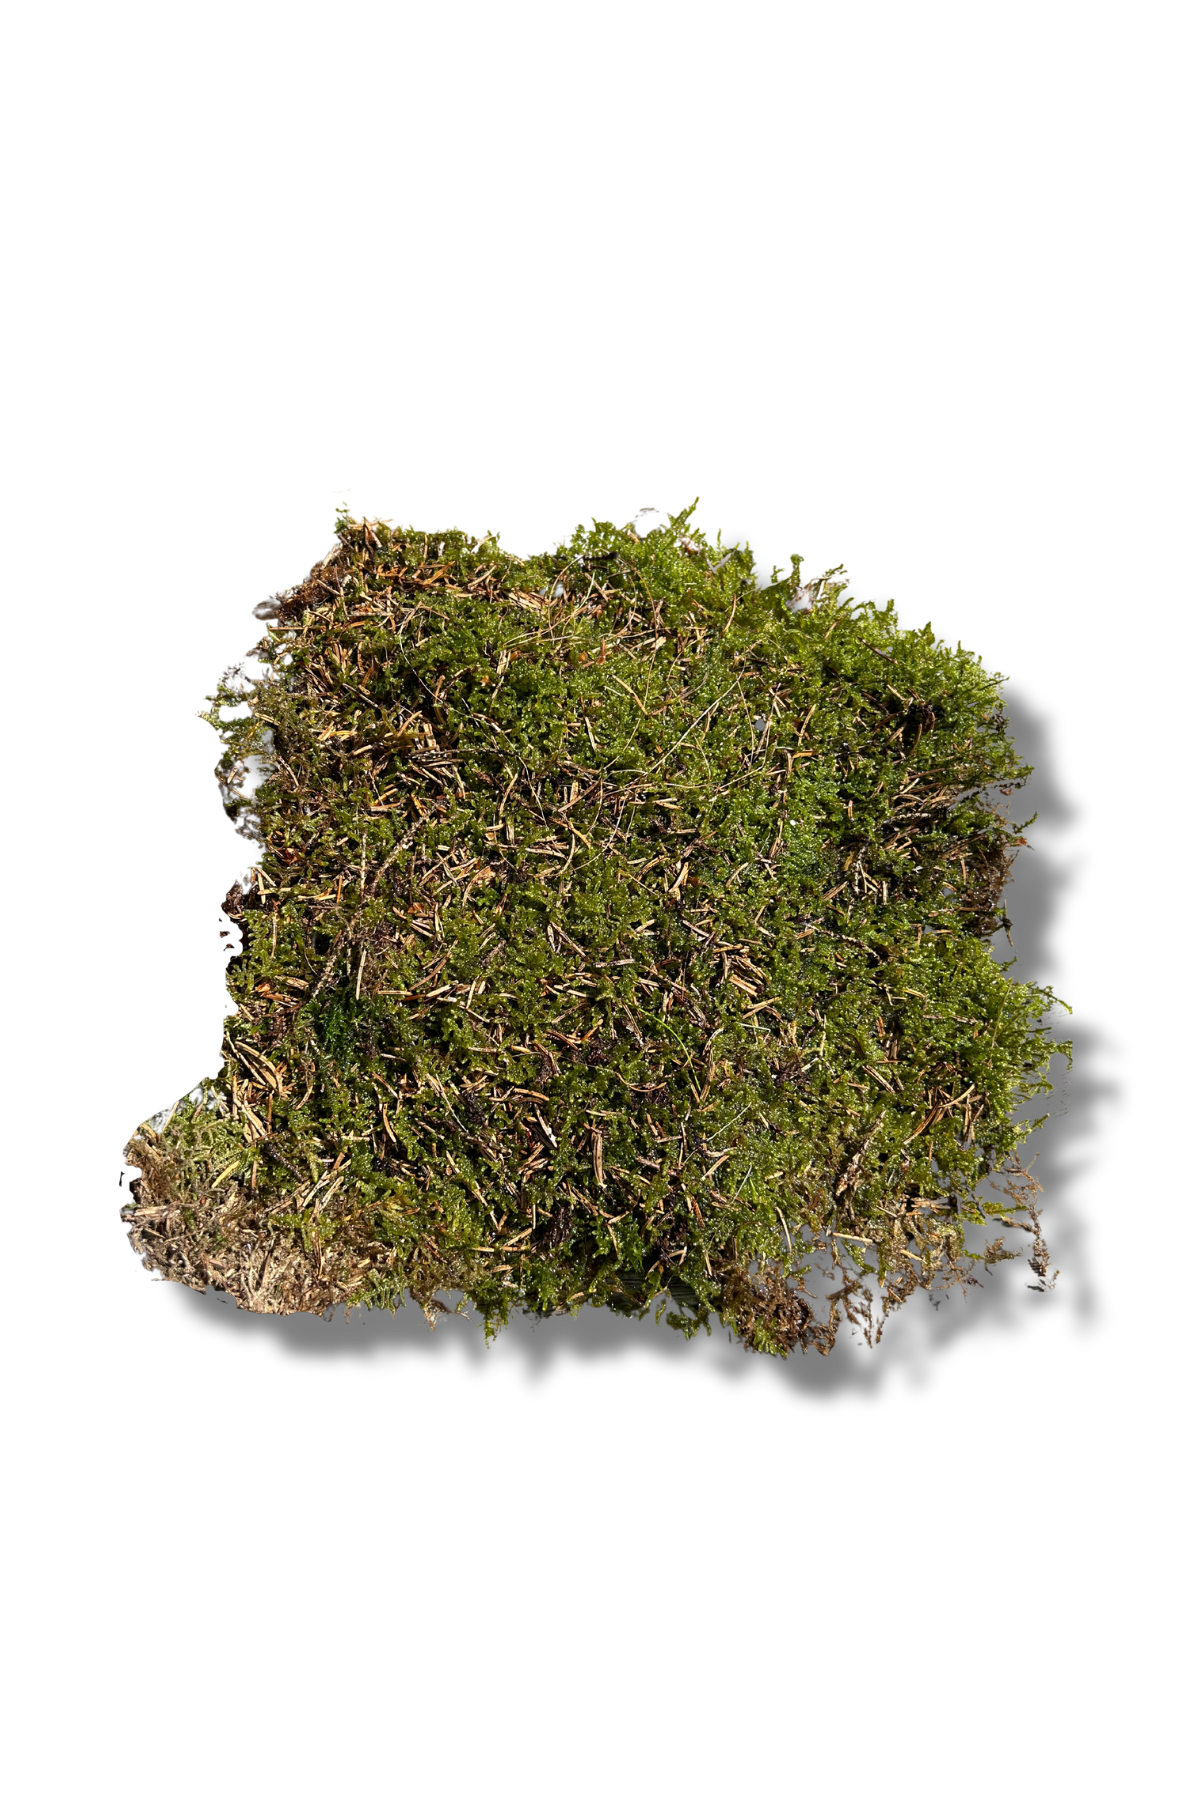 Live Moss for Indoor Plants, Terrariums, Hanging Baskets and